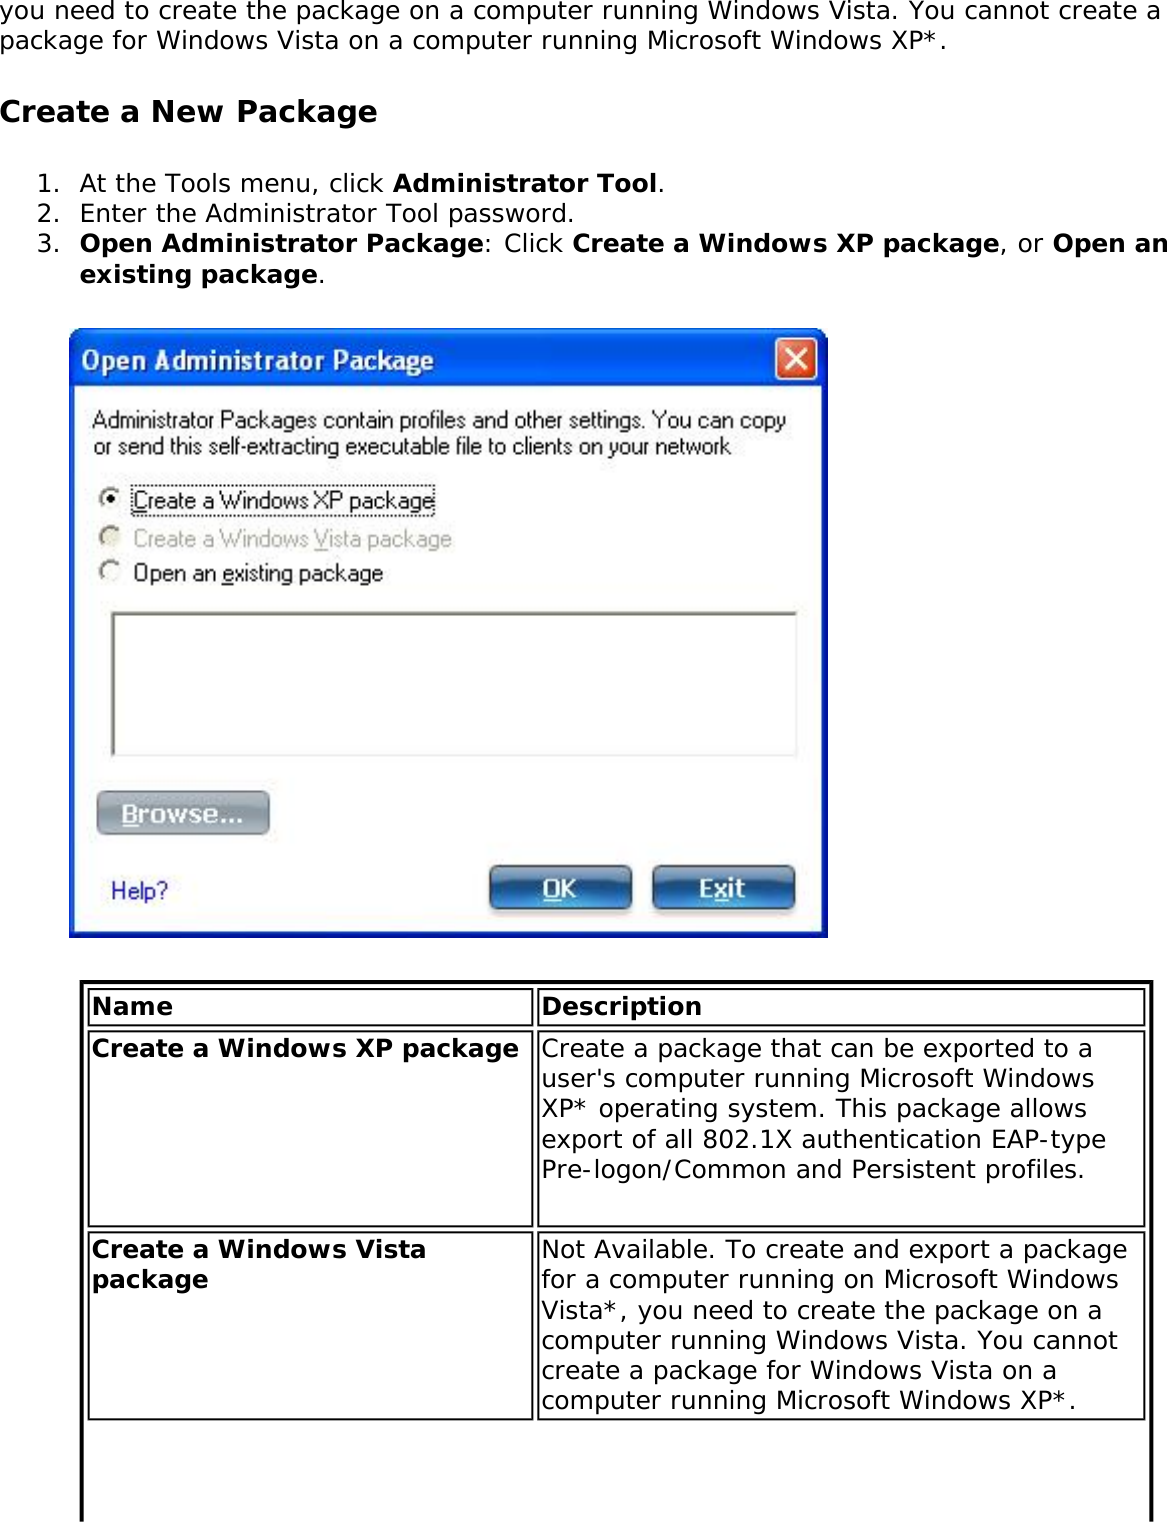 you need to create the package on a computer running Windows Vista. You cannot create a package for Windows Vista on a computer running Microsoft Windows XP*.Create a New Package1.  At the Tools menu, click Administrator Tool.2.  Enter the Administrator Tool password.3.  Open Administrator Package: Click Create a Windows XP package, or Open an existing package. Name DescriptionCreate a Windows XP package  Create a package that can be exported to a user&apos;s computer running Microsoft Windows XP* operating system. This package allows export of all 802.1X authentication EAP-type Pre-logon/Common and Persistent profiles.Create a Windows Vista package Not Available. To create and export a package for a computer running on Microsoft Windows Vista*, you need to create the package on a computer running Windows Vista. You cannot create a package for Windows Vista on a computer running Microsoft Windows XP*.